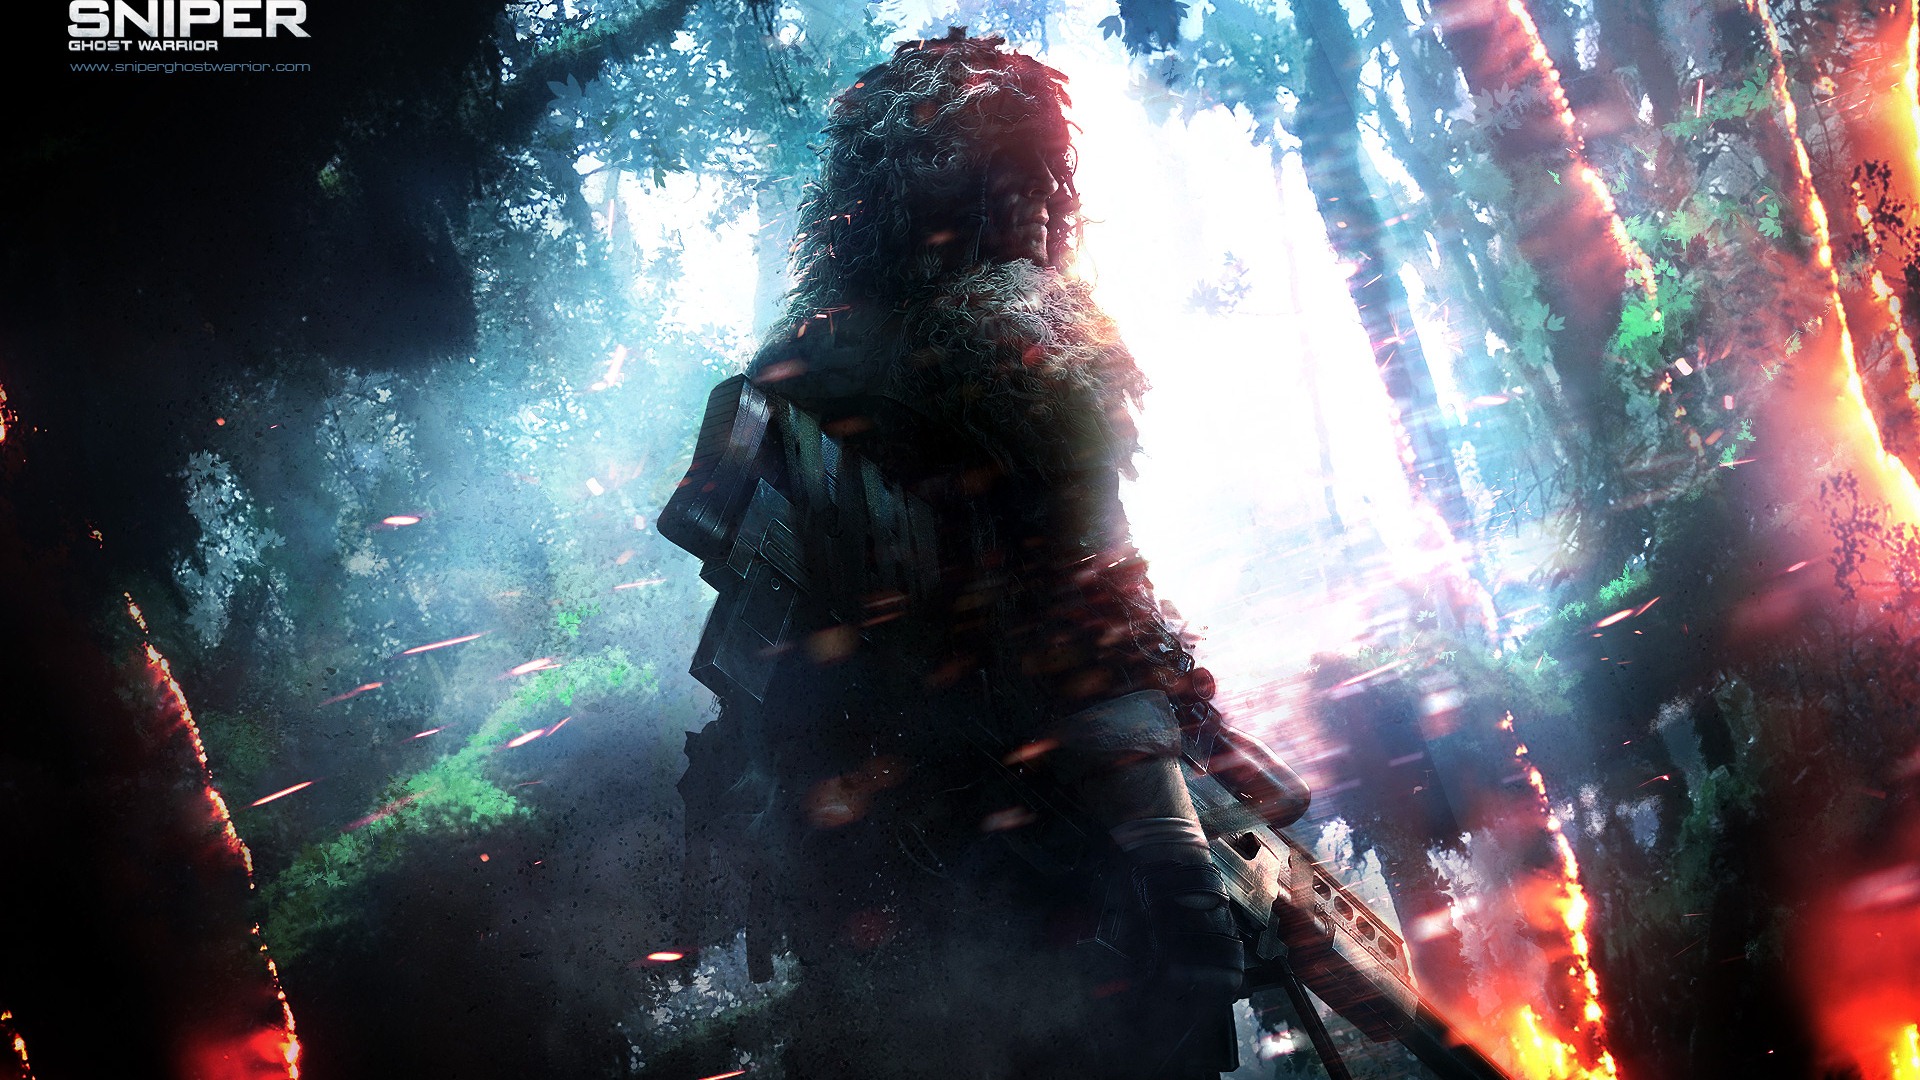 Sniper: Ghost Warrior 2 HD wallpapers #1 - 1920x1080